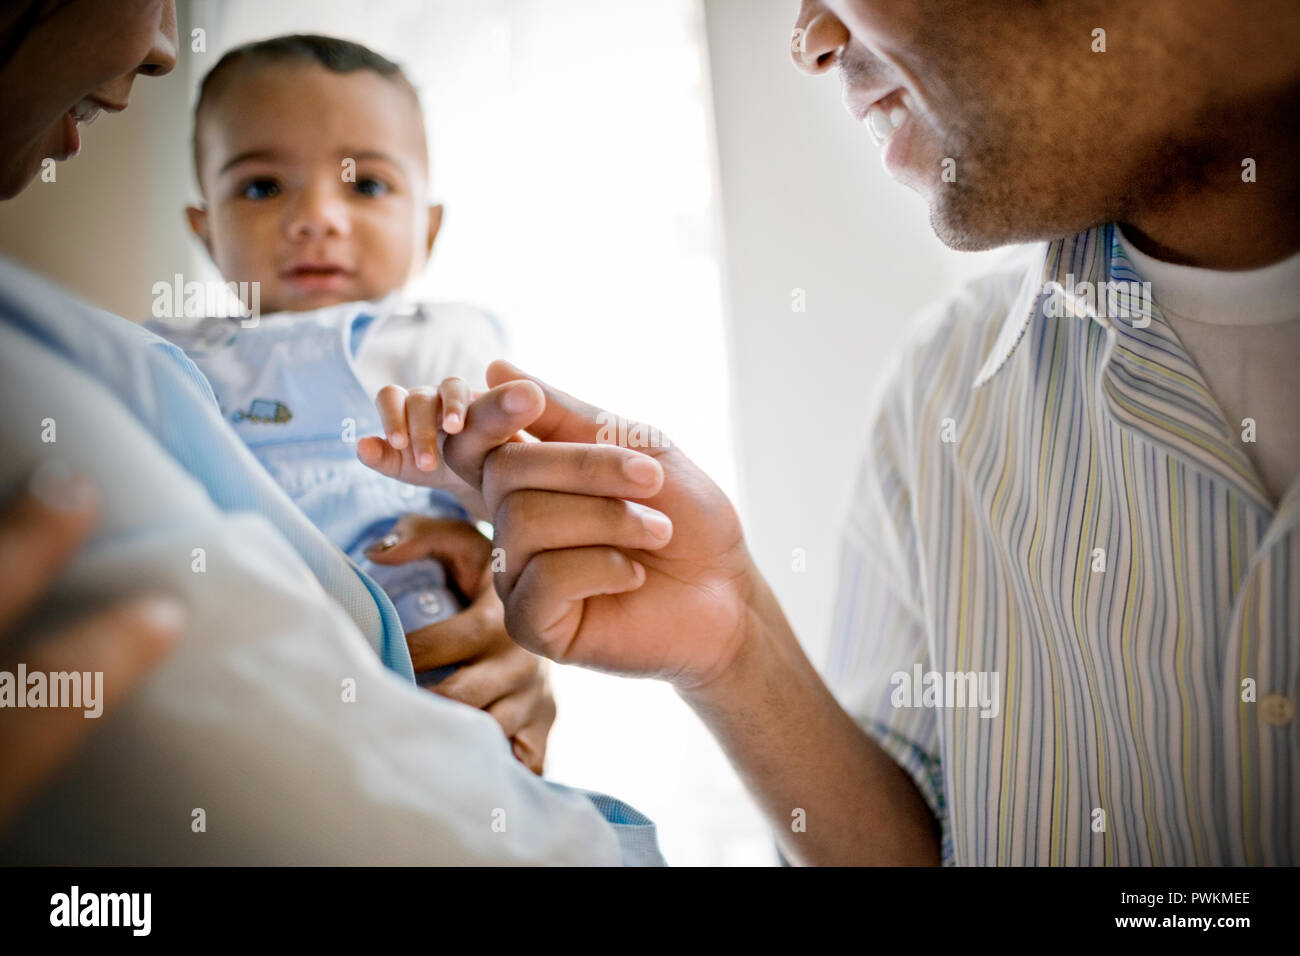 Mid-adult man the hand of his baby boy. Stock Photo